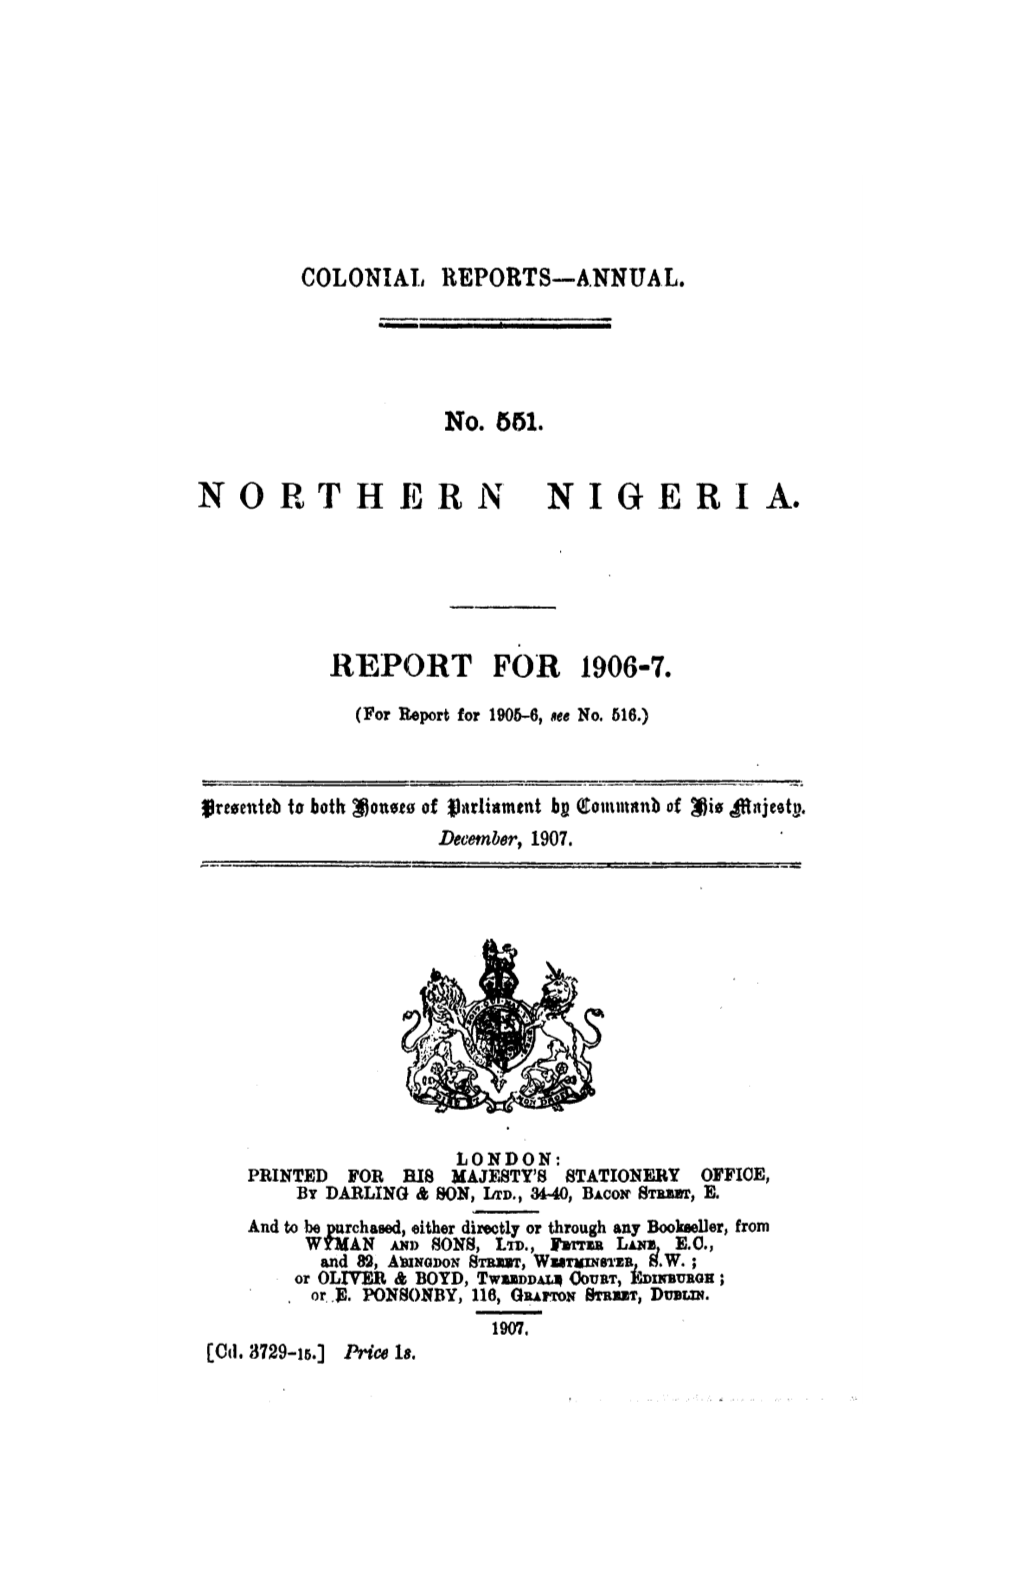 Annual Report of the Colonies, Northern Nigeria, 1906-07